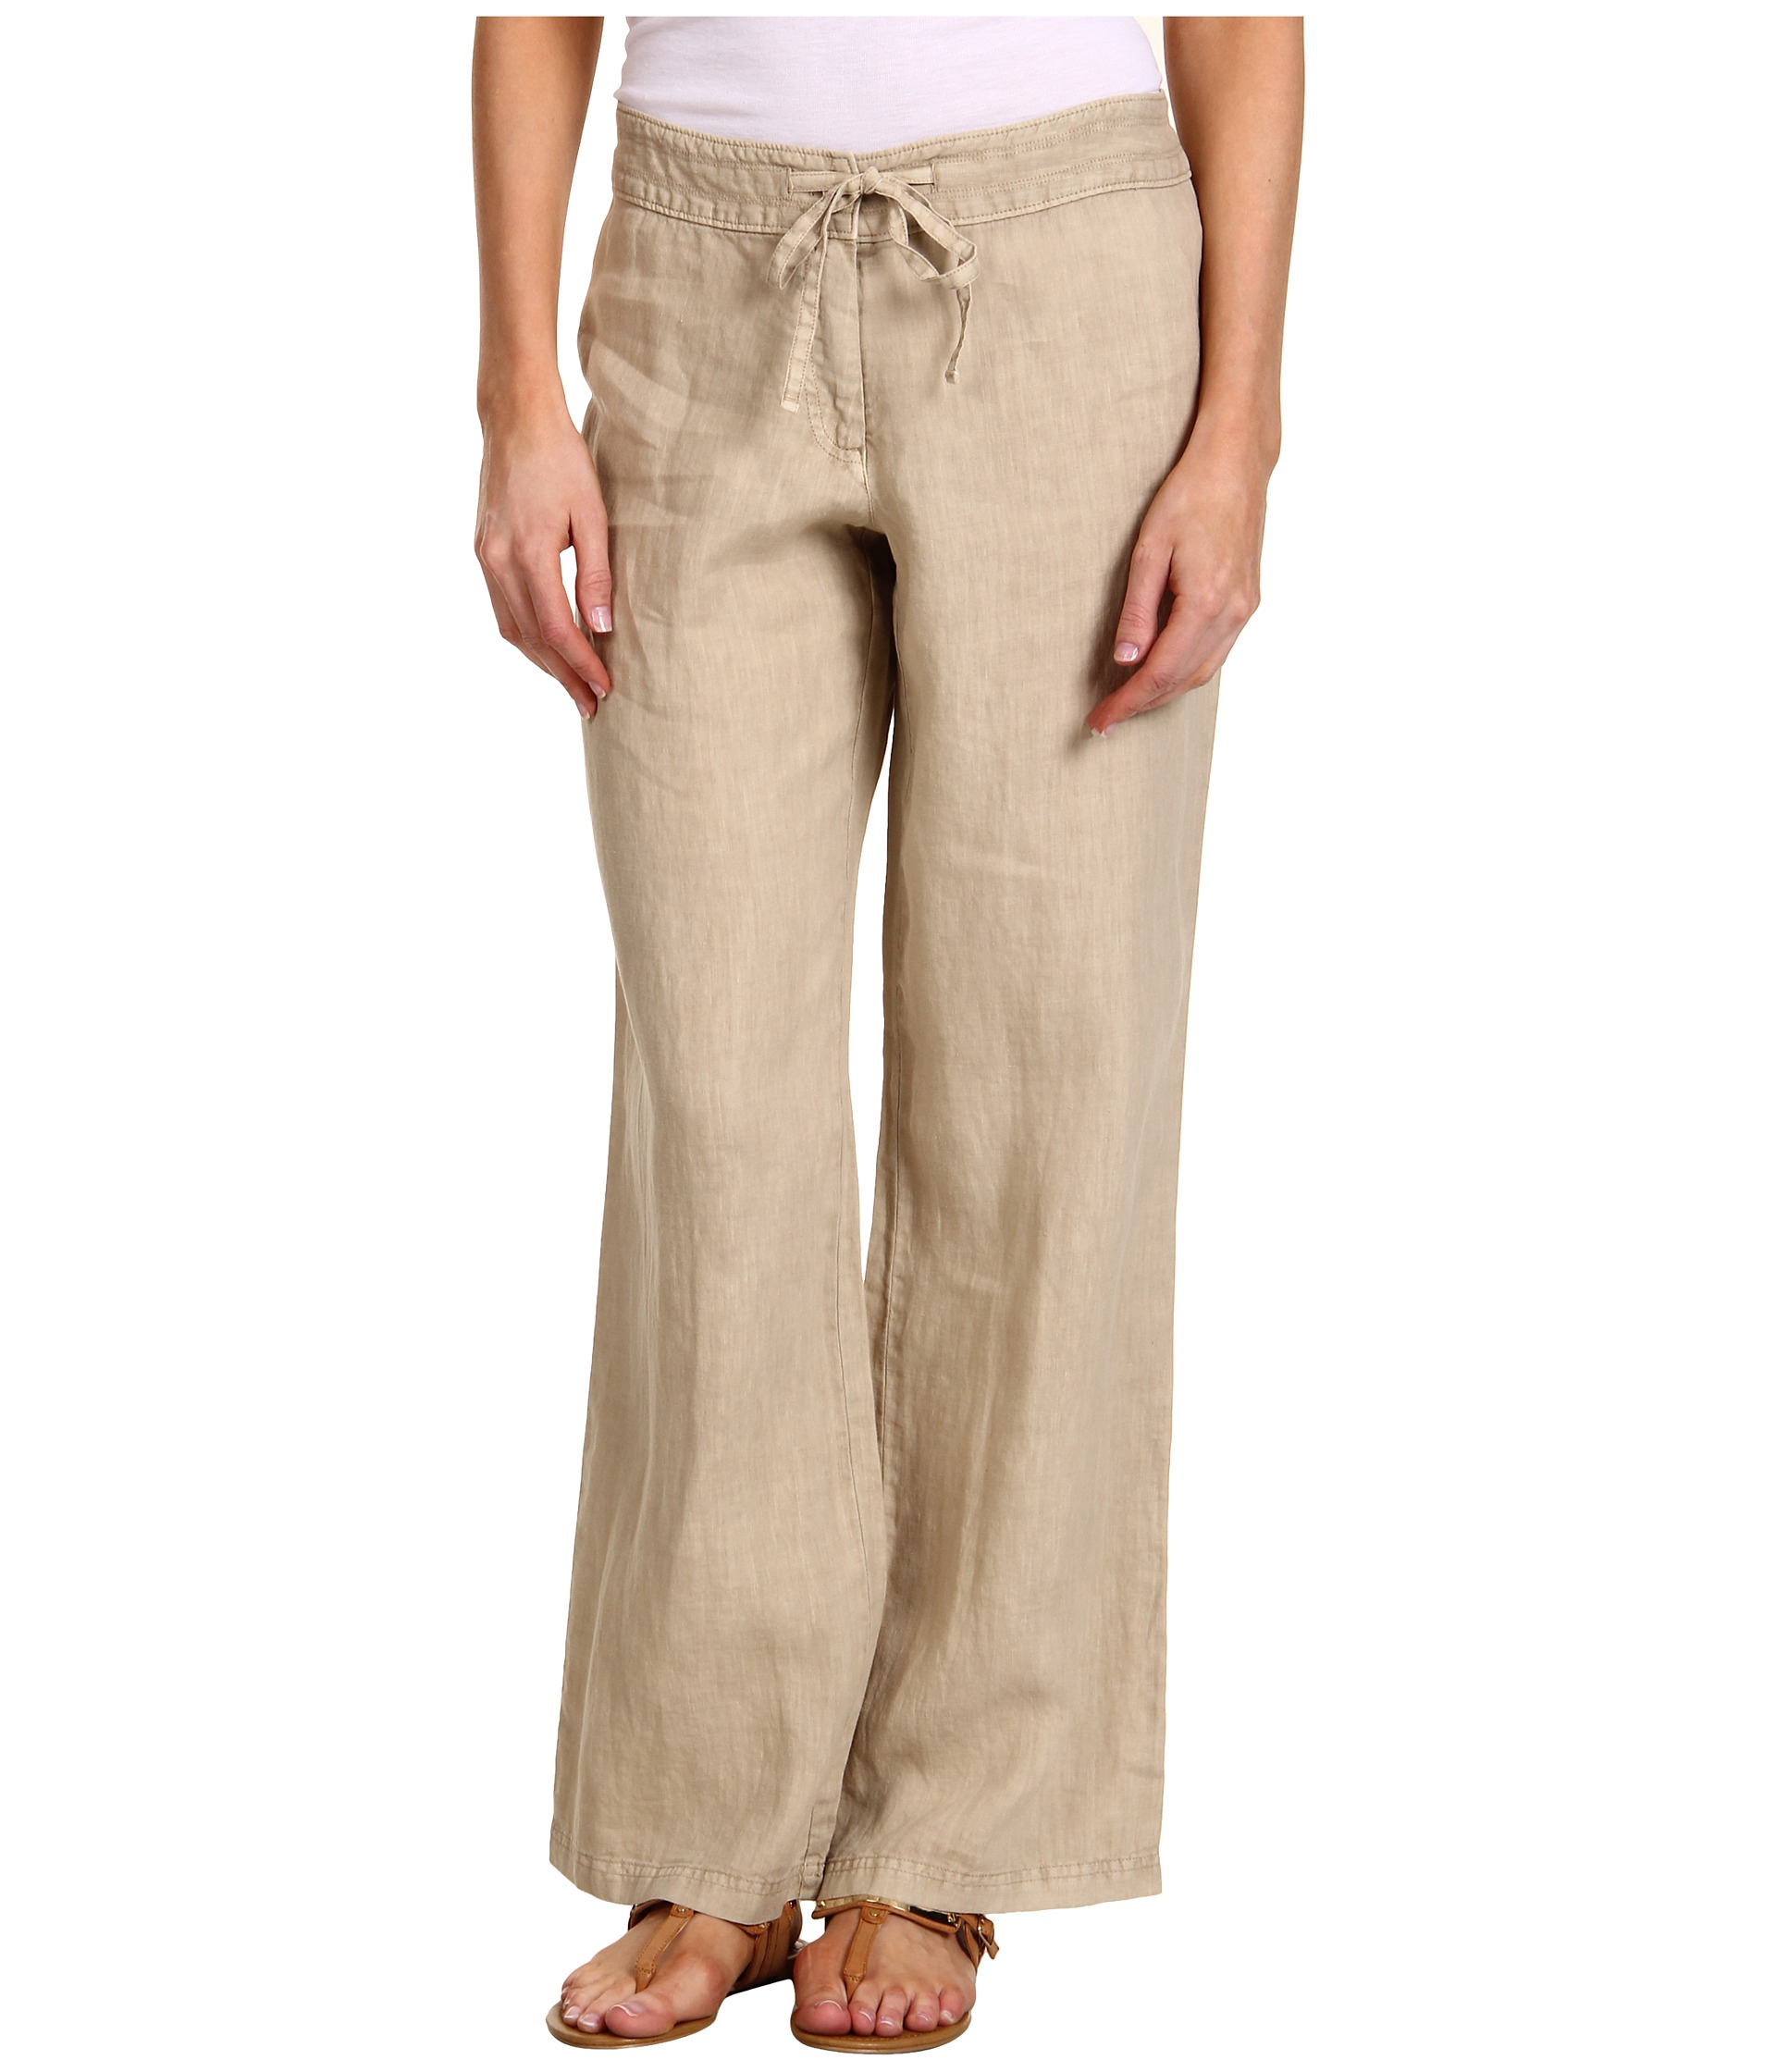 Lyst - Tommy Bahama Two Palms Linen Pant in Natural